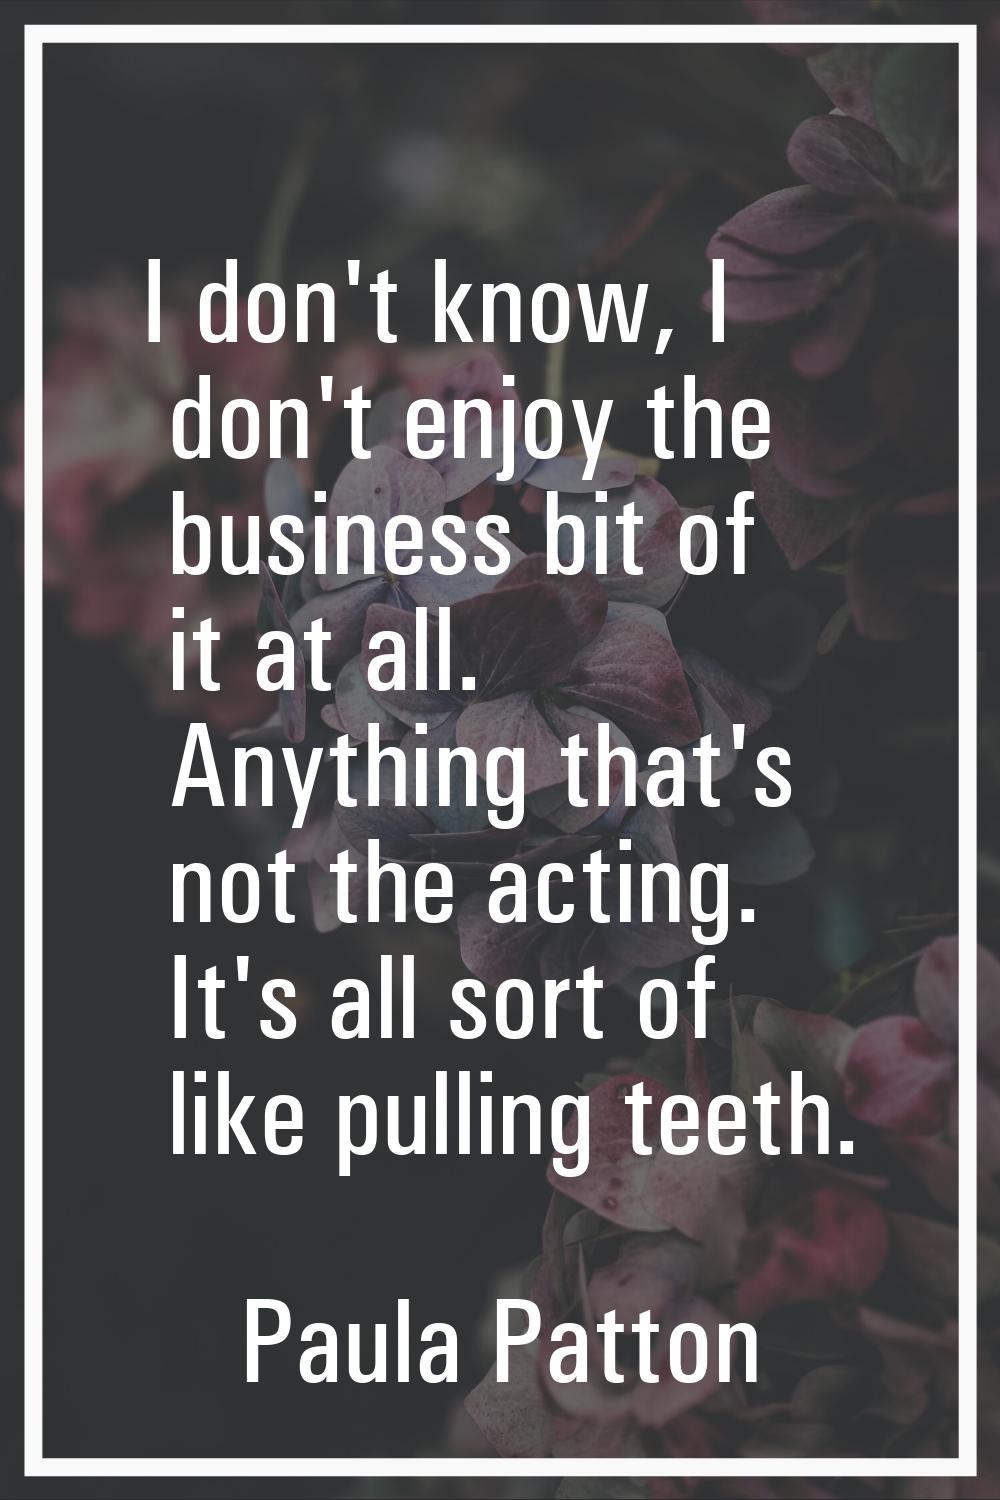 I don't know, I don't enjoy the business bit of it at all. Anything that's not the acting. It's all